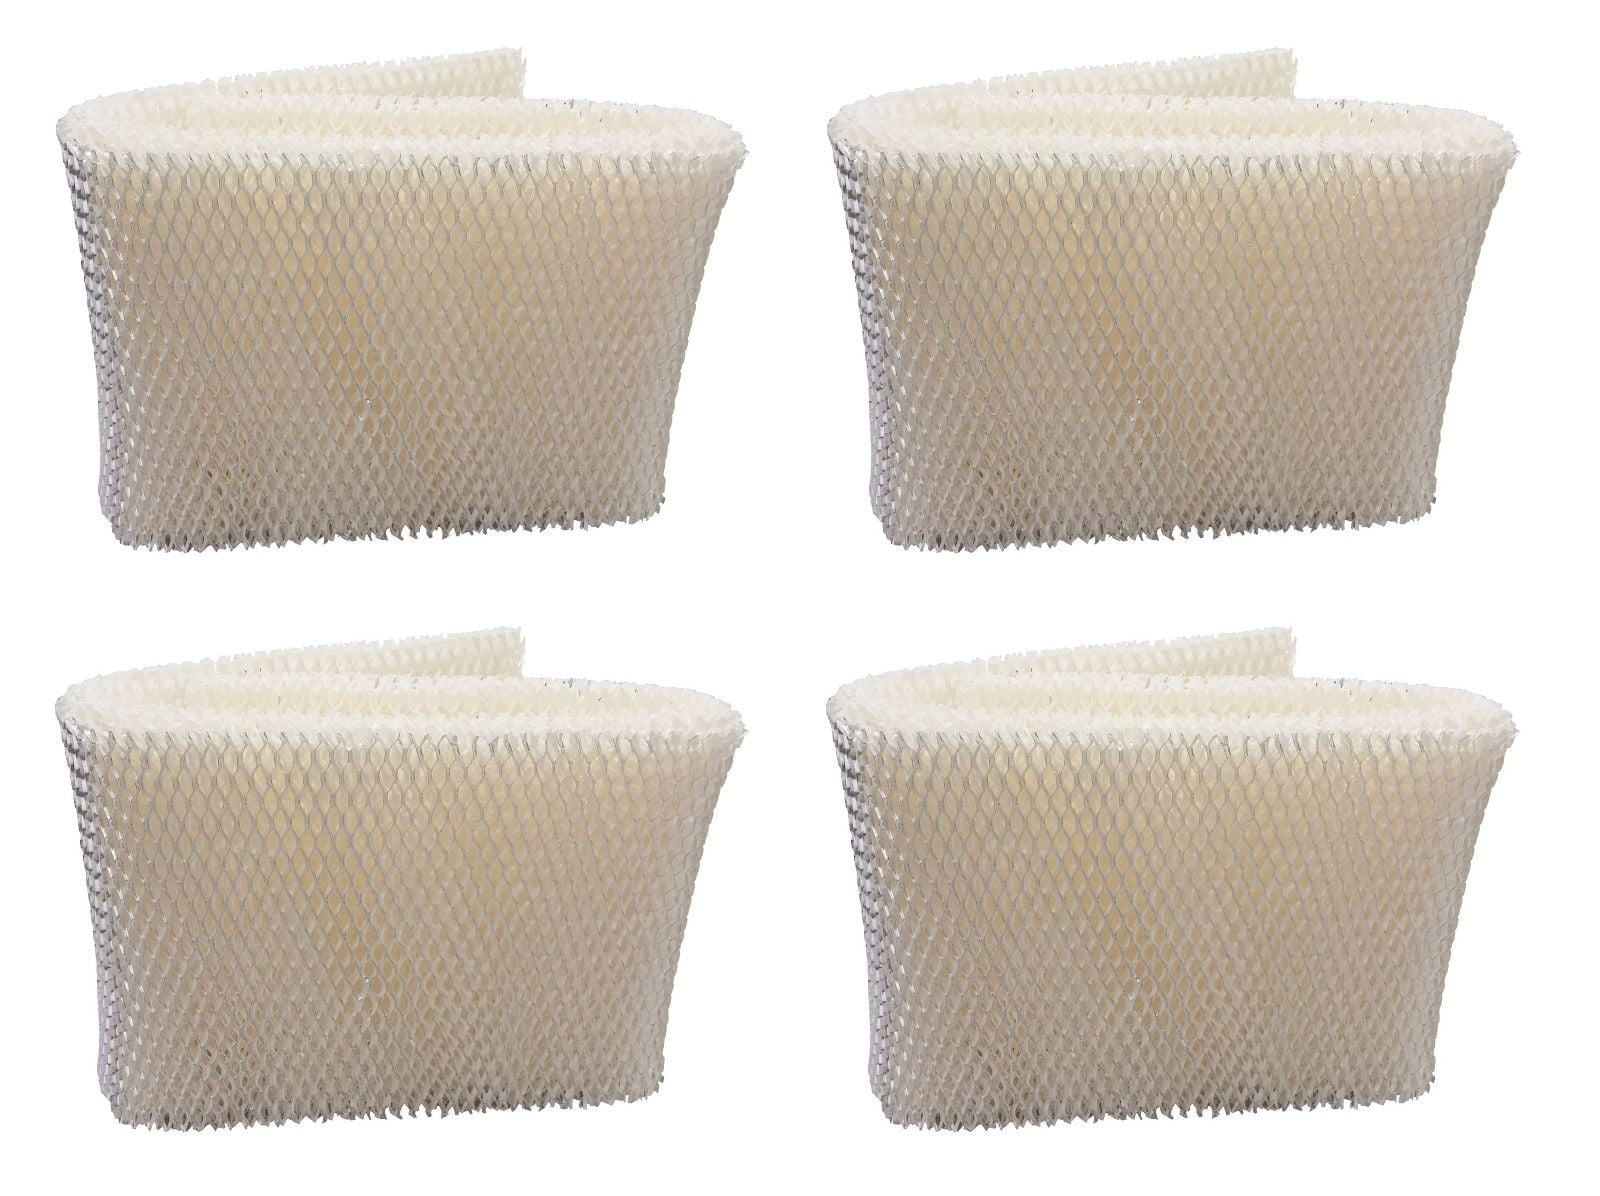 Essick Air MAF1 Replacement Wicking Humidifier Filter 